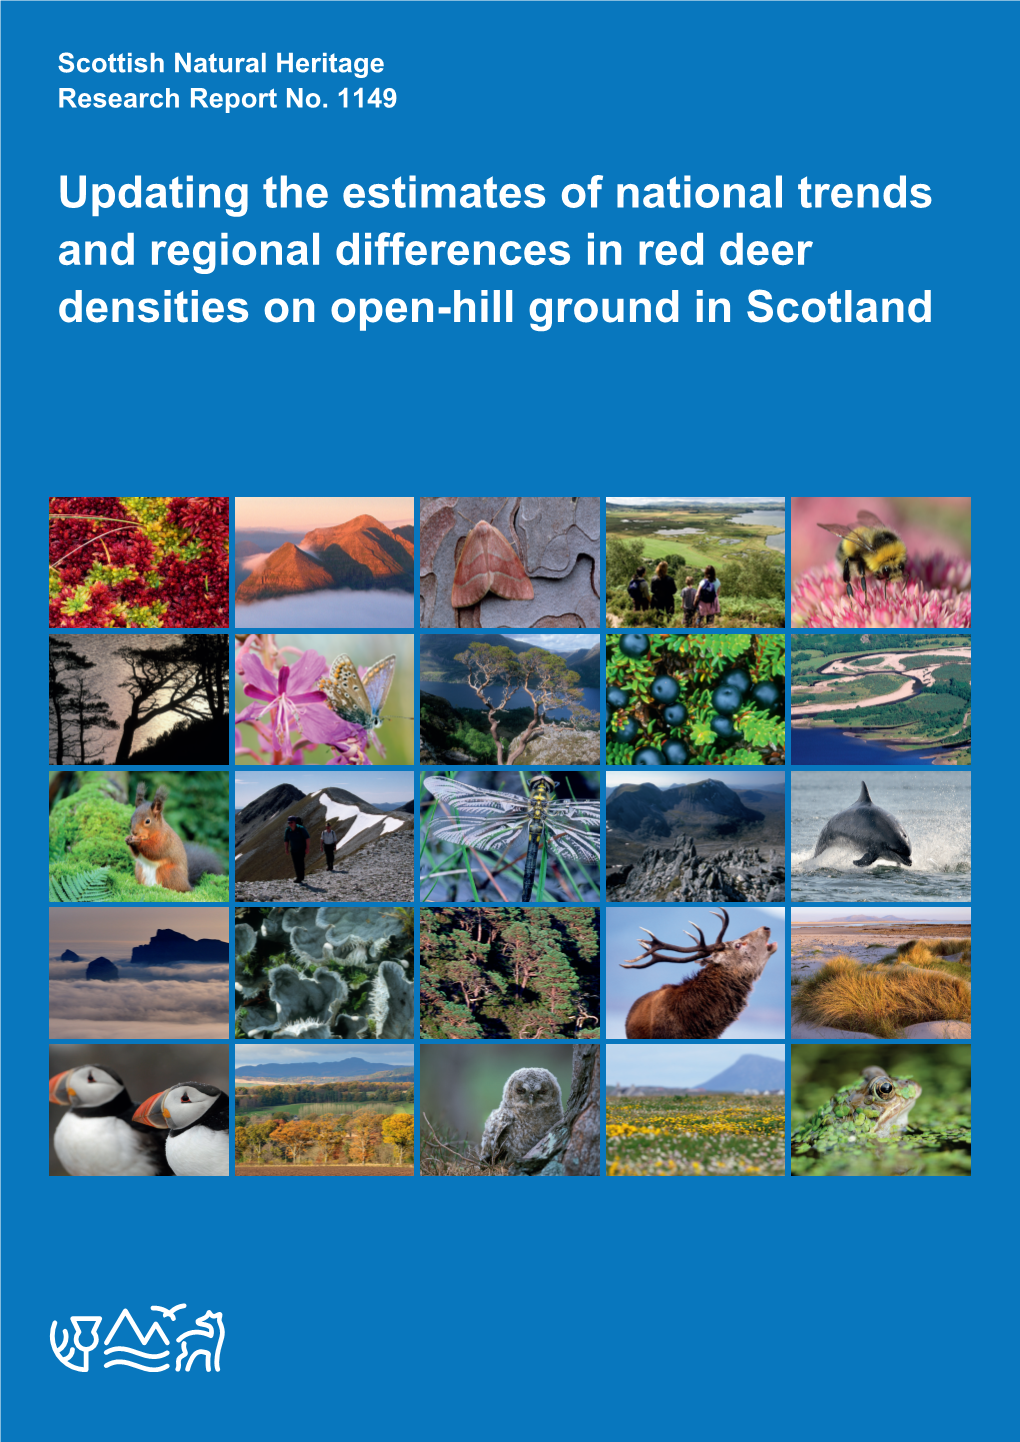 SNH Research Report 1149: Updating the Estimates of National Trends and Regional Differences in Red Deer Densities on Open-Hill